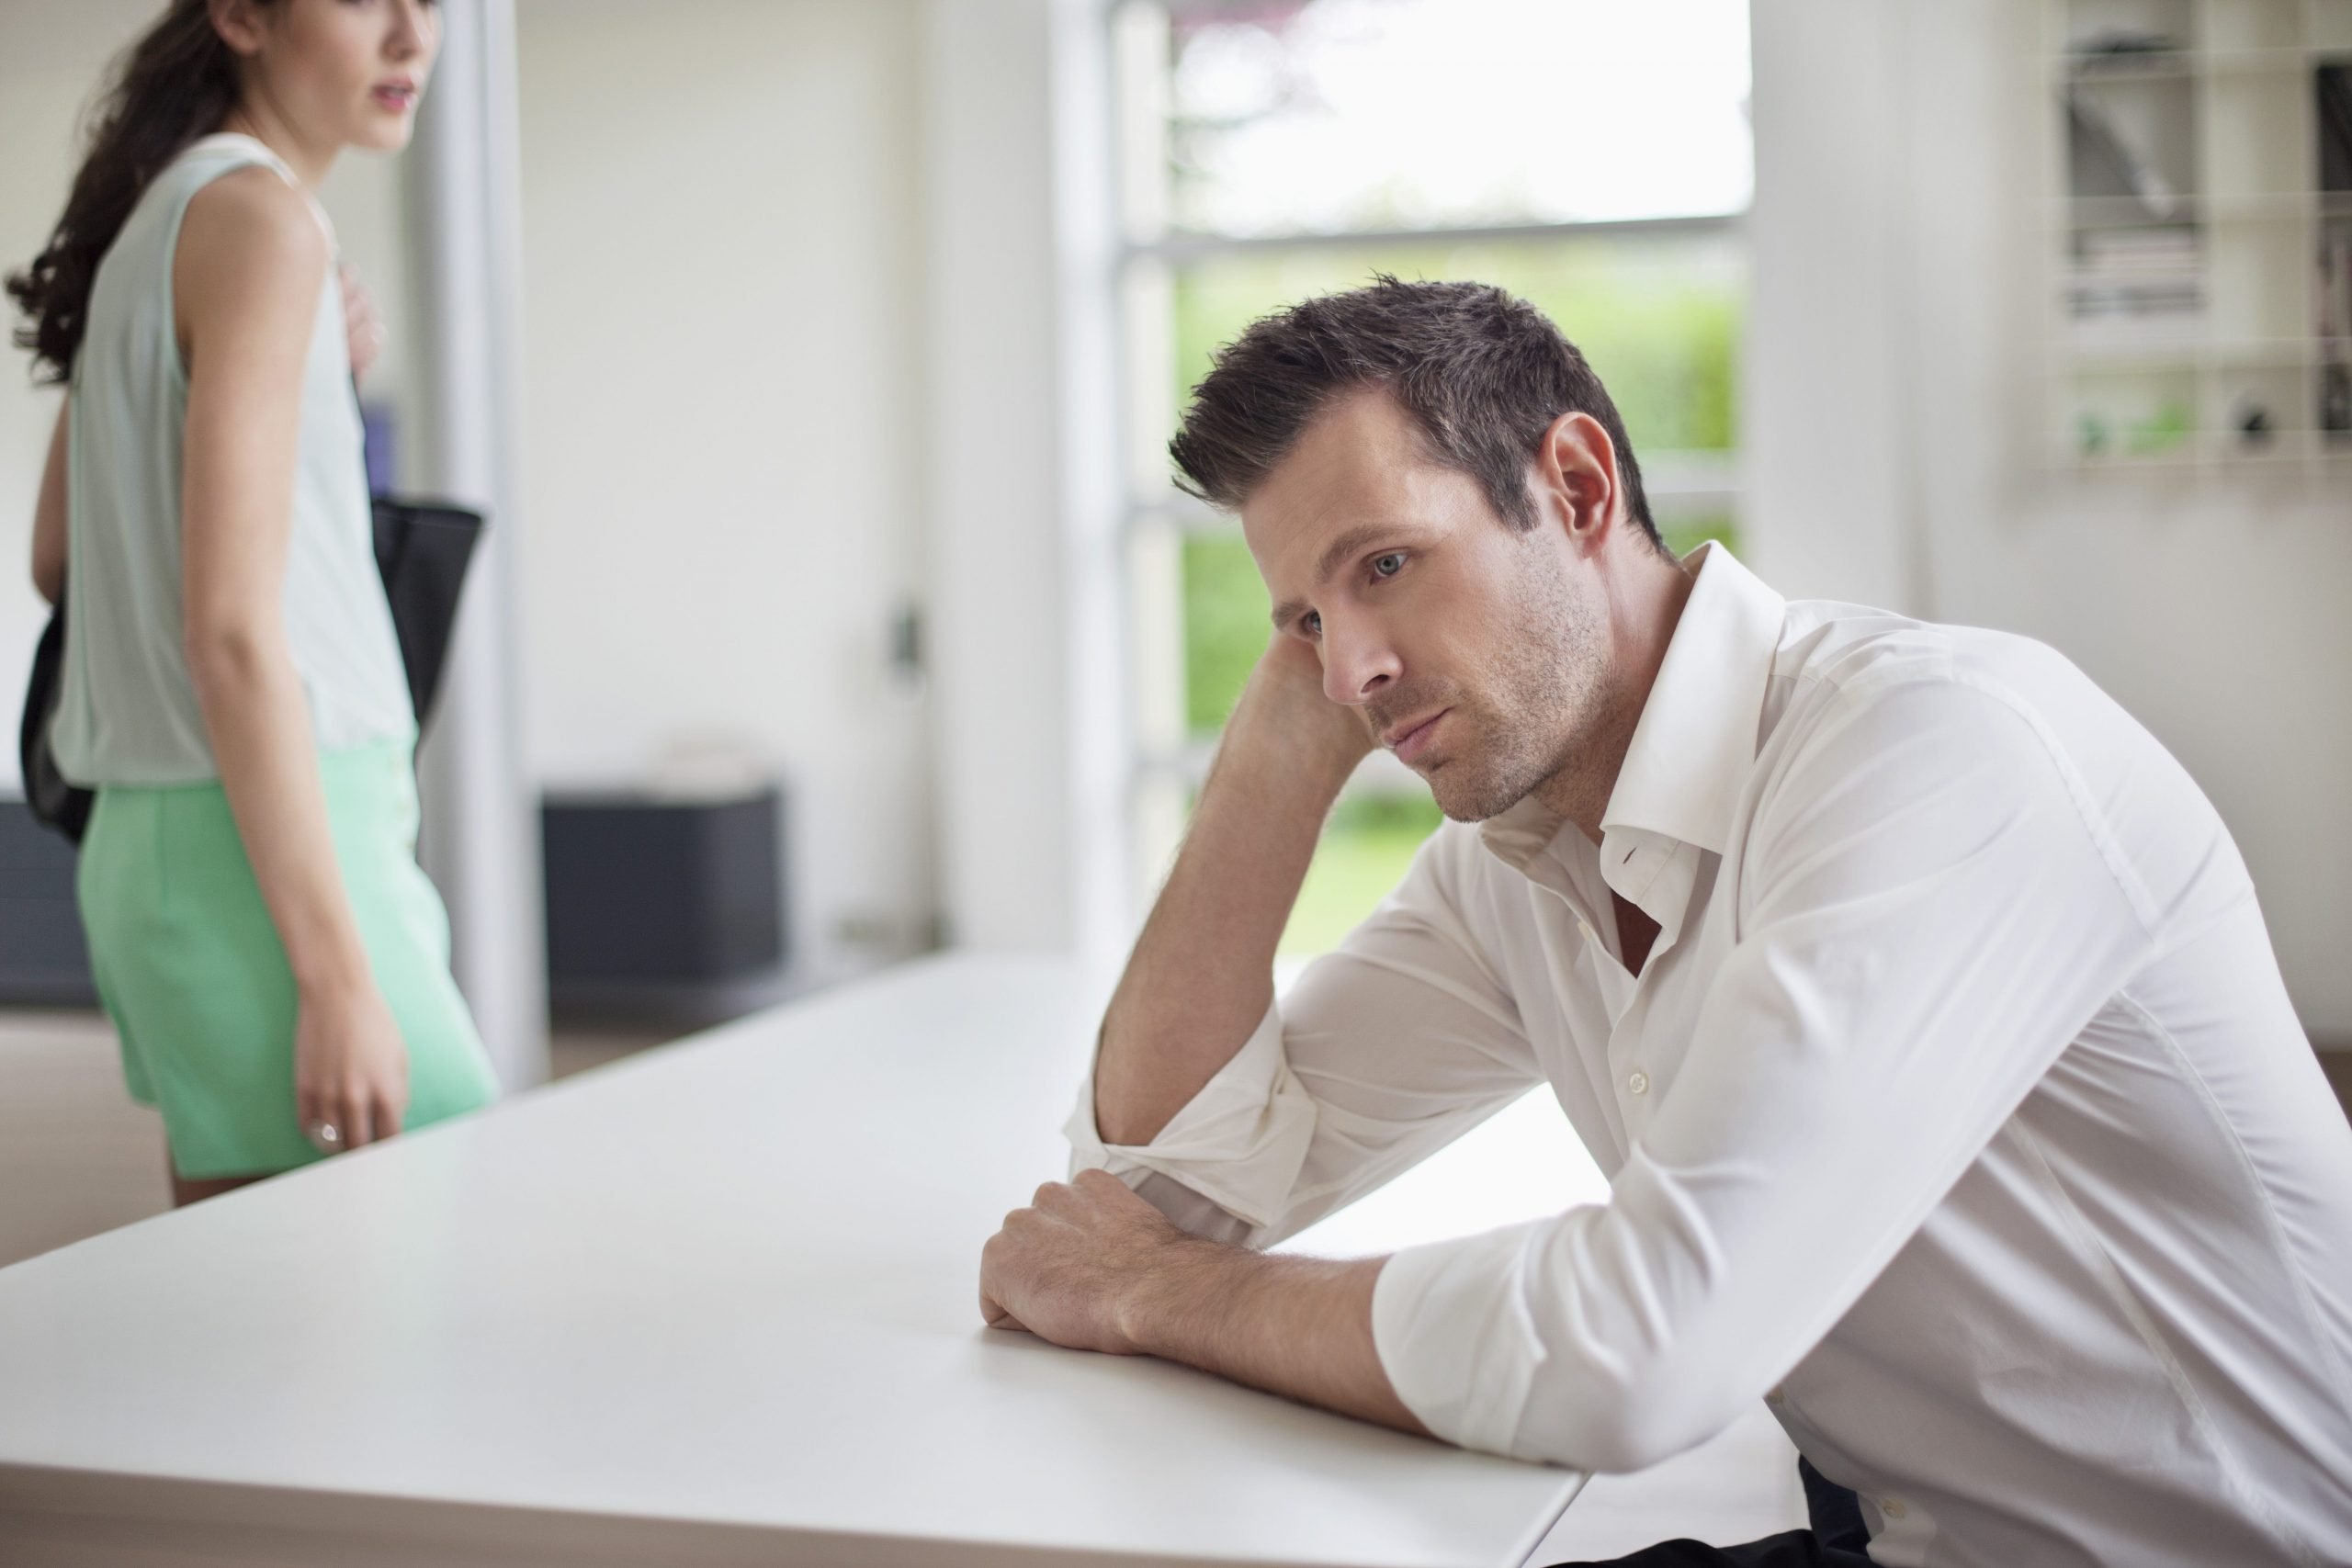 My Husband Hates His Job And Is Very Depressed